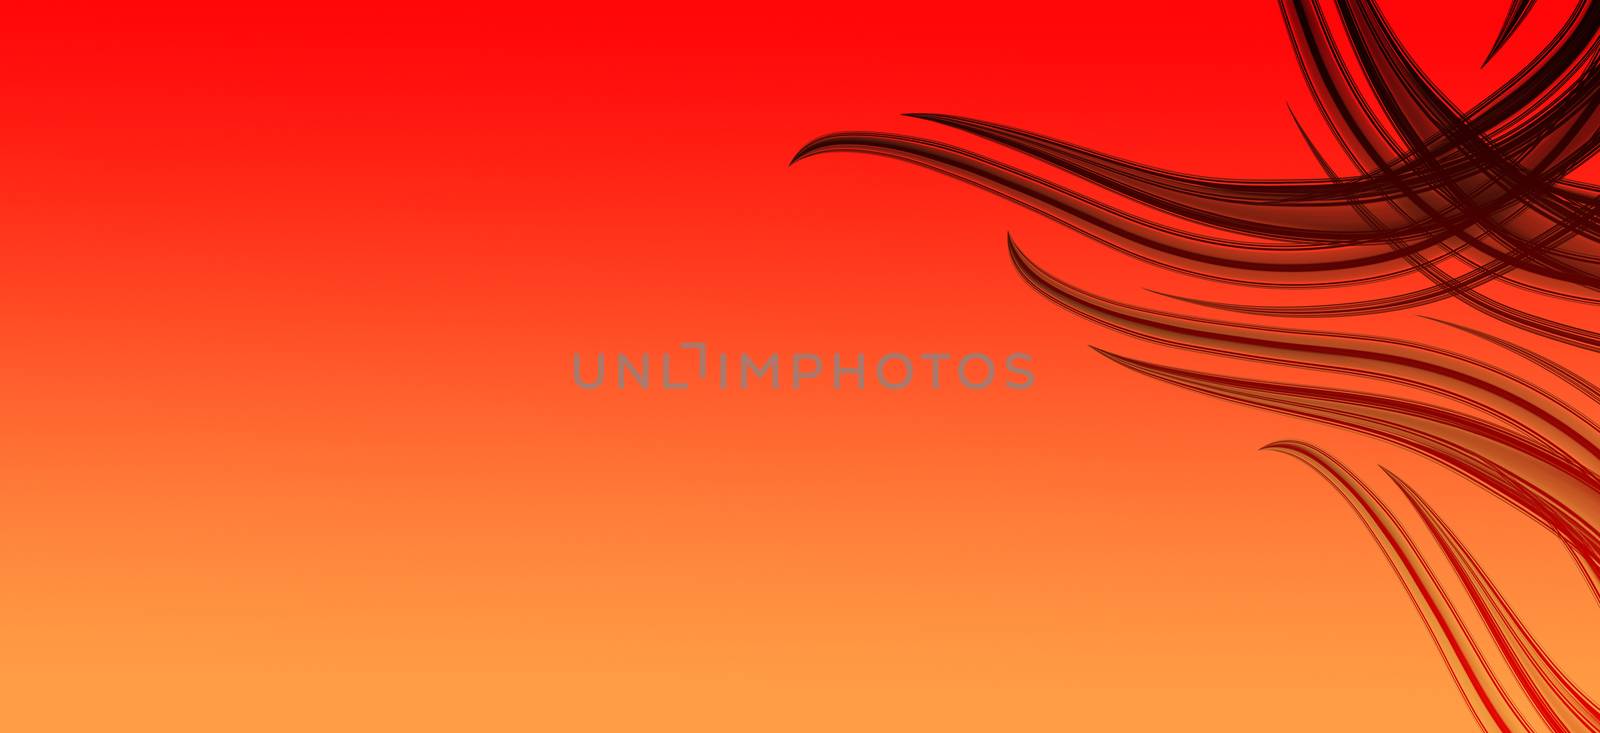 Abstract design, red background for many purposes.